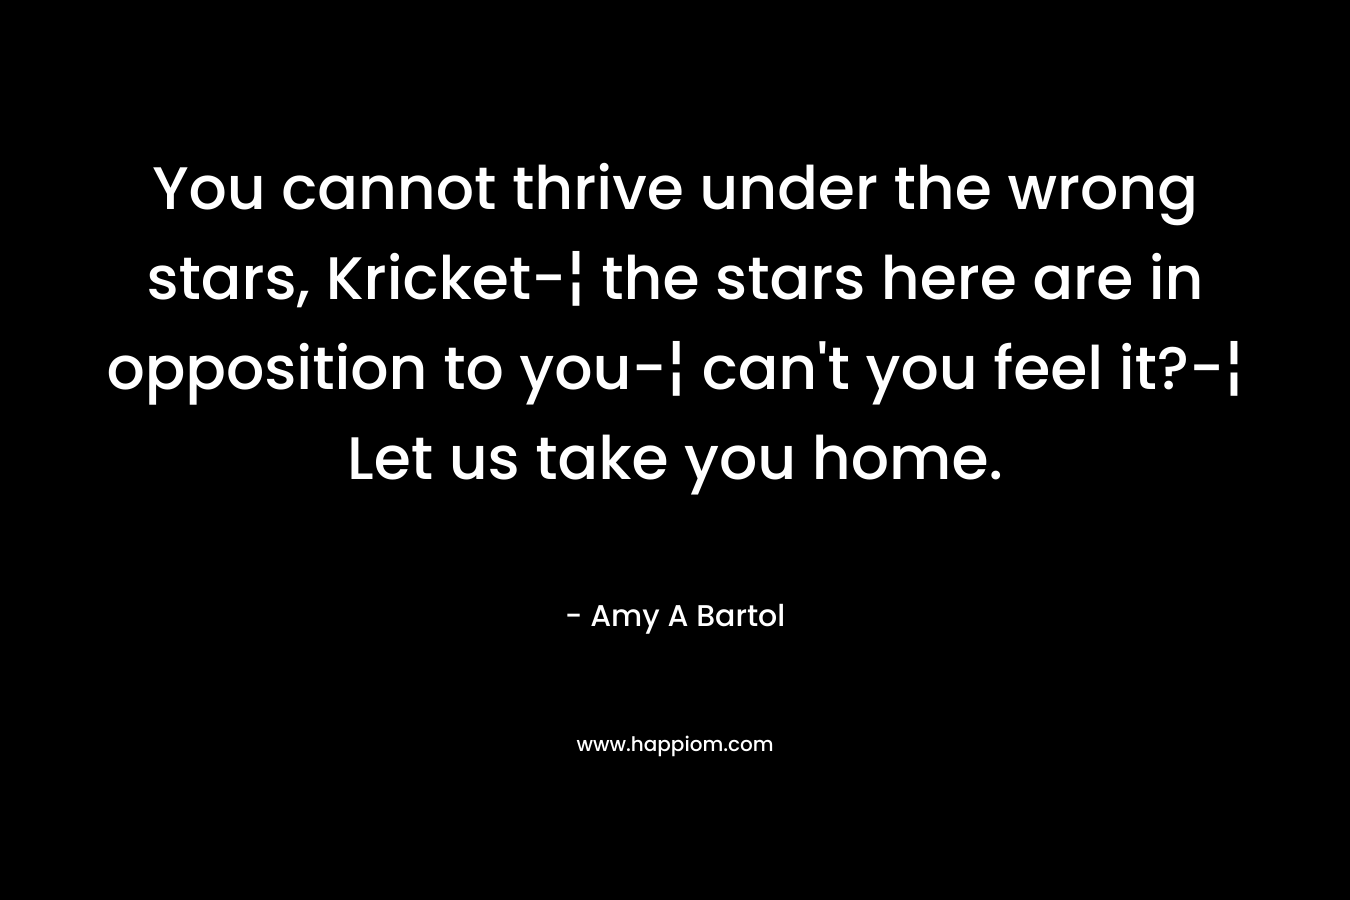 You cannot thrive under the wrong stars, Kricket-¦ the stars here are in opposition to you-¦ can’t you feel it?-¦ Let us take you home. – Amy A Bartol